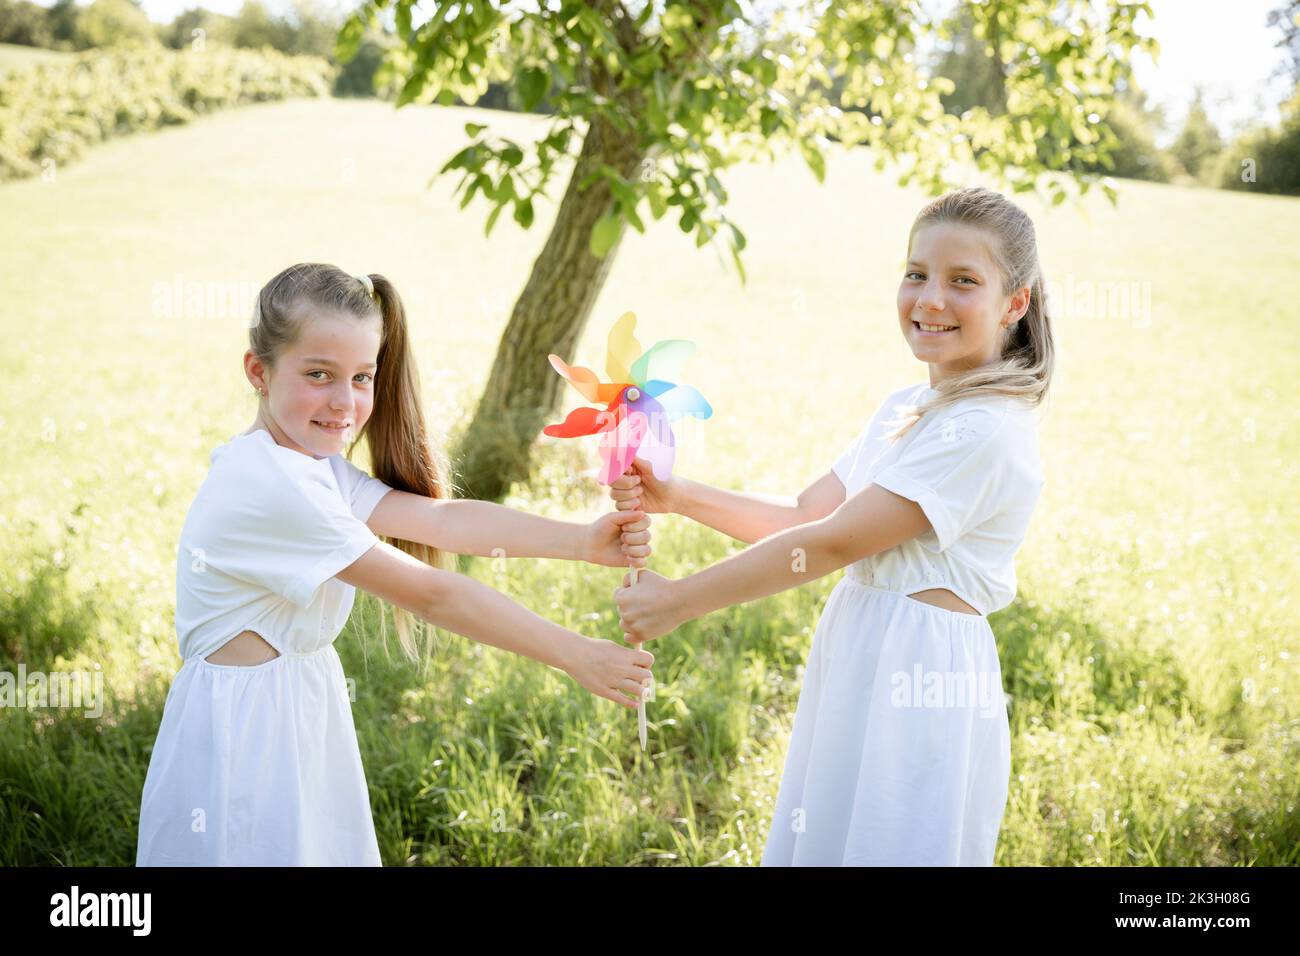 two pretty girls, sisters with white dresses holding colorful pinwheels and standing in green meadow in front of a walnut tree and are happy Stock Photo